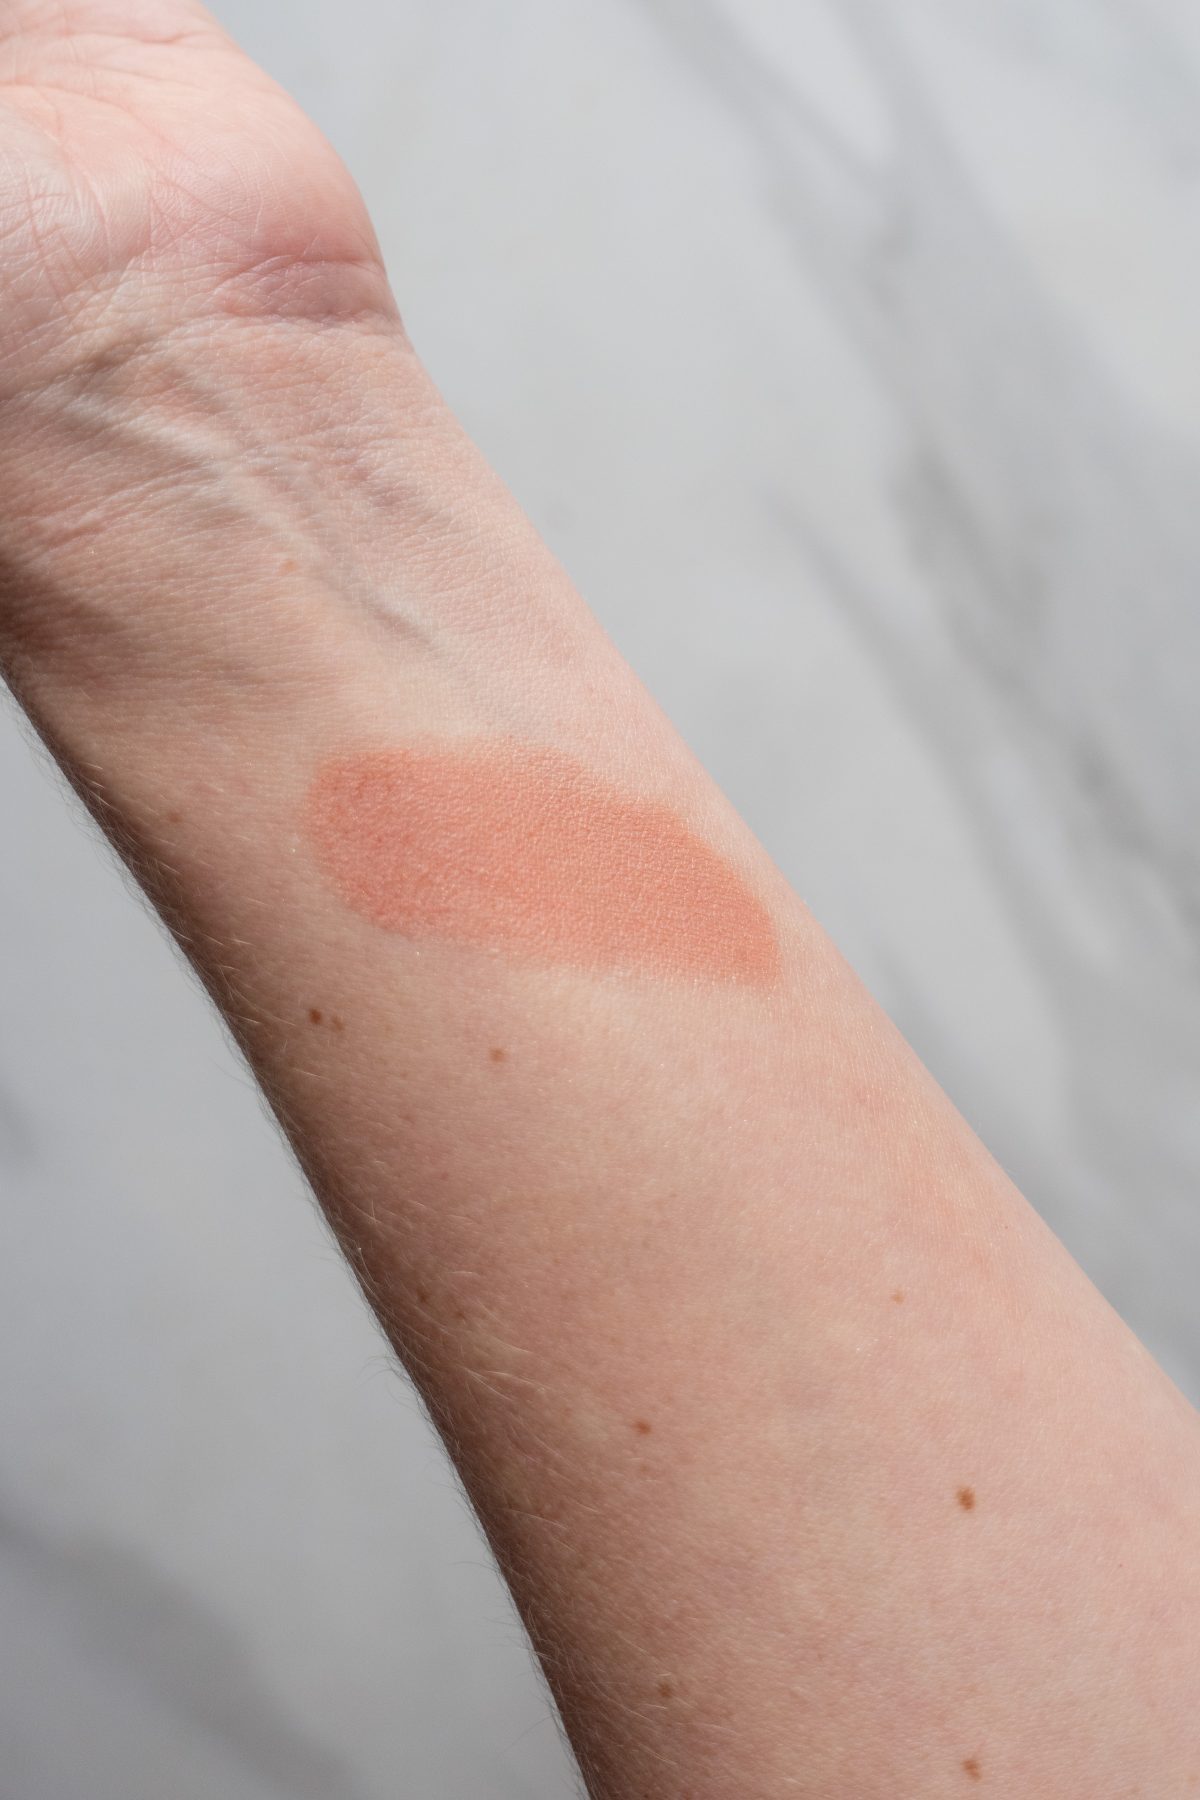 Milani Baked Blush Review and Swatches - Berry Amore Swatch